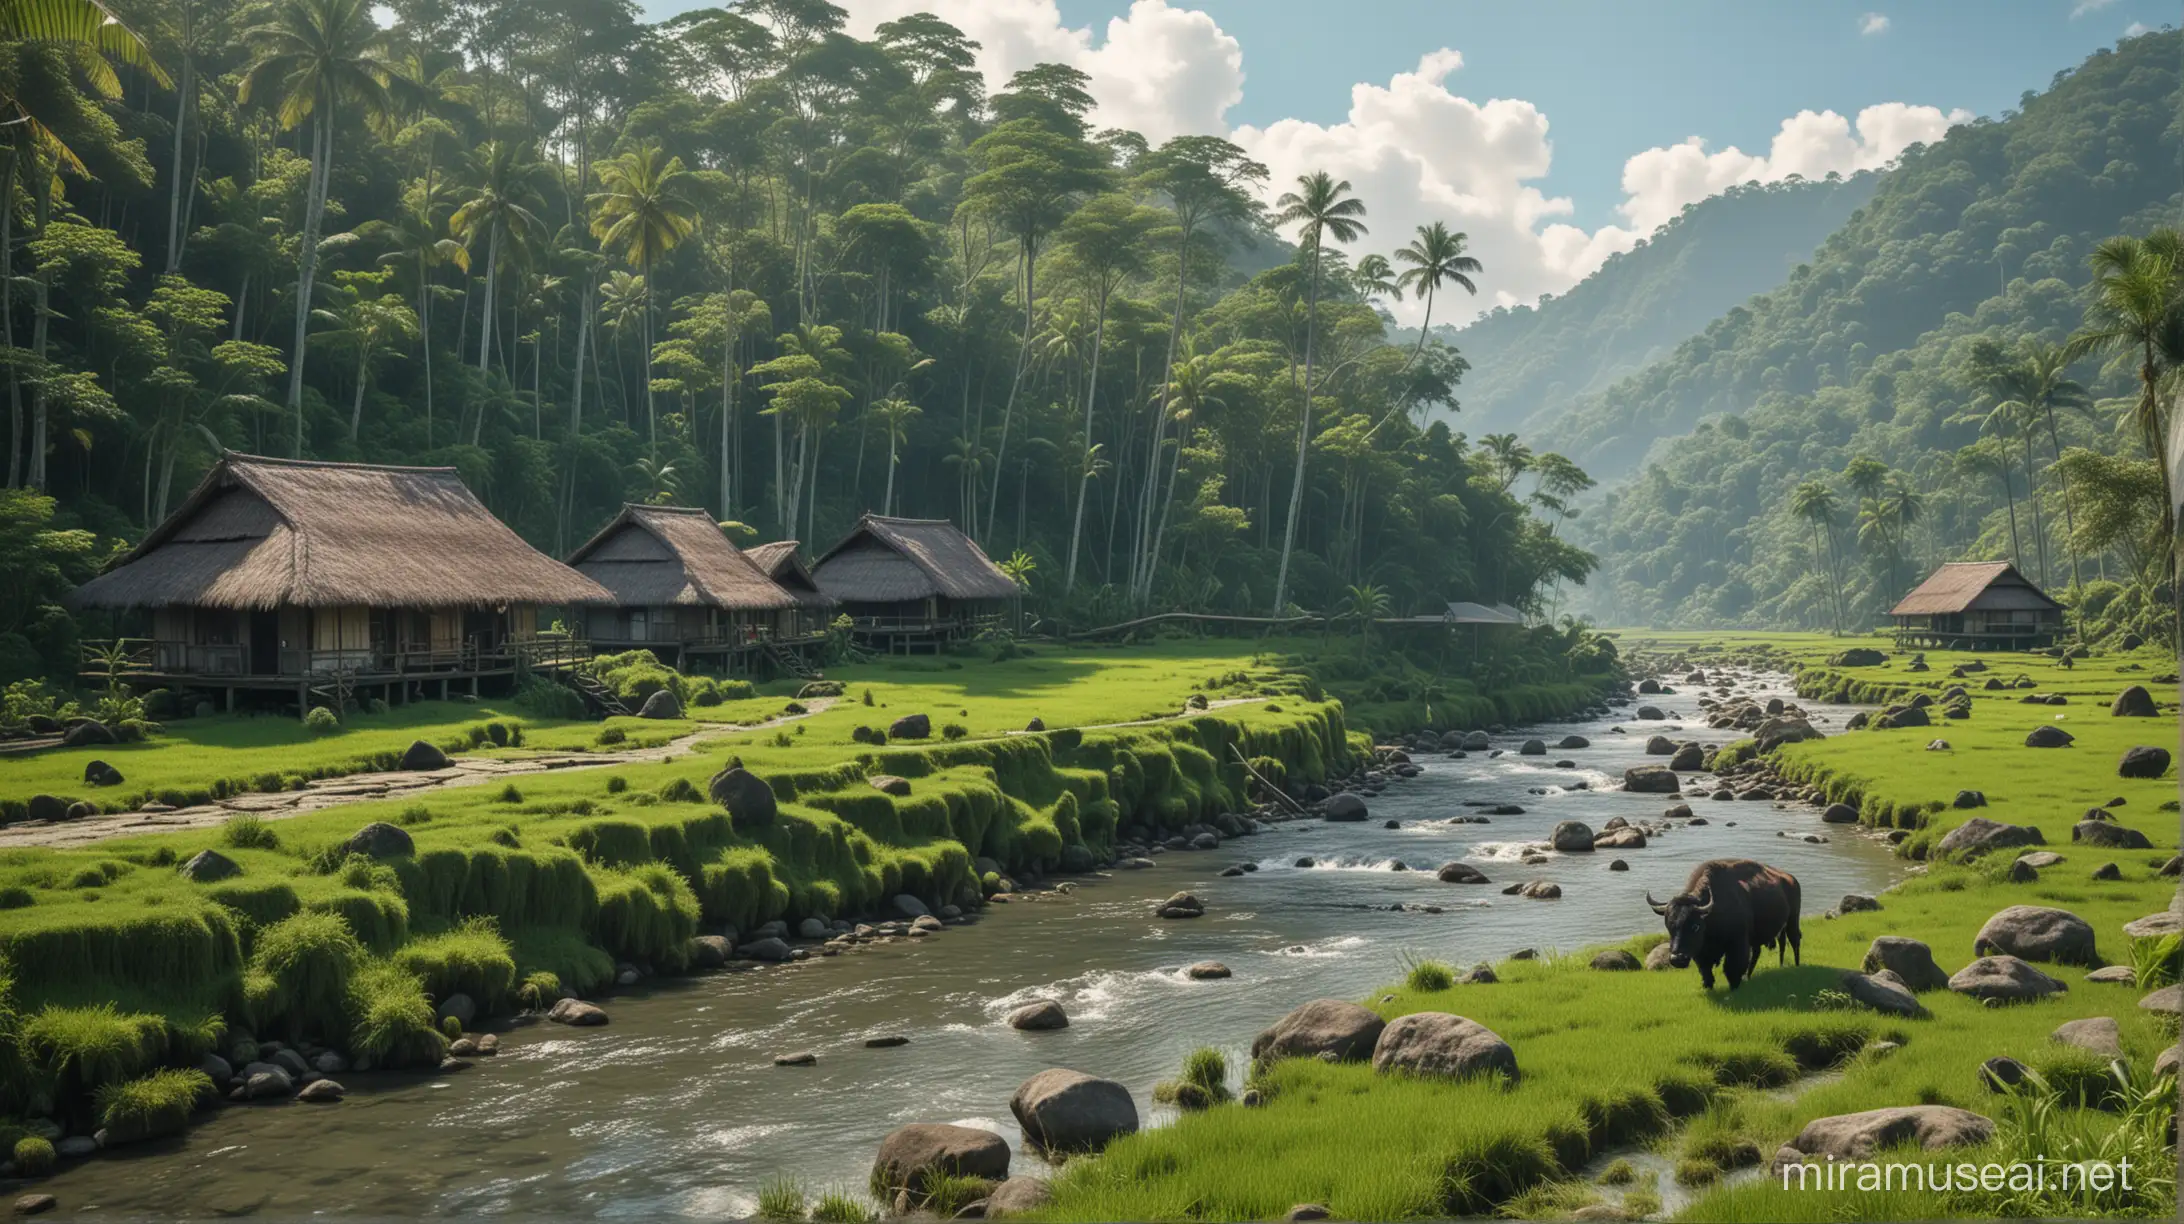 Indonesian Settlement Houses Amidst Lush Greenery Buffalo Family Drinking from Stream in Cinematic 4K Ultra HDR